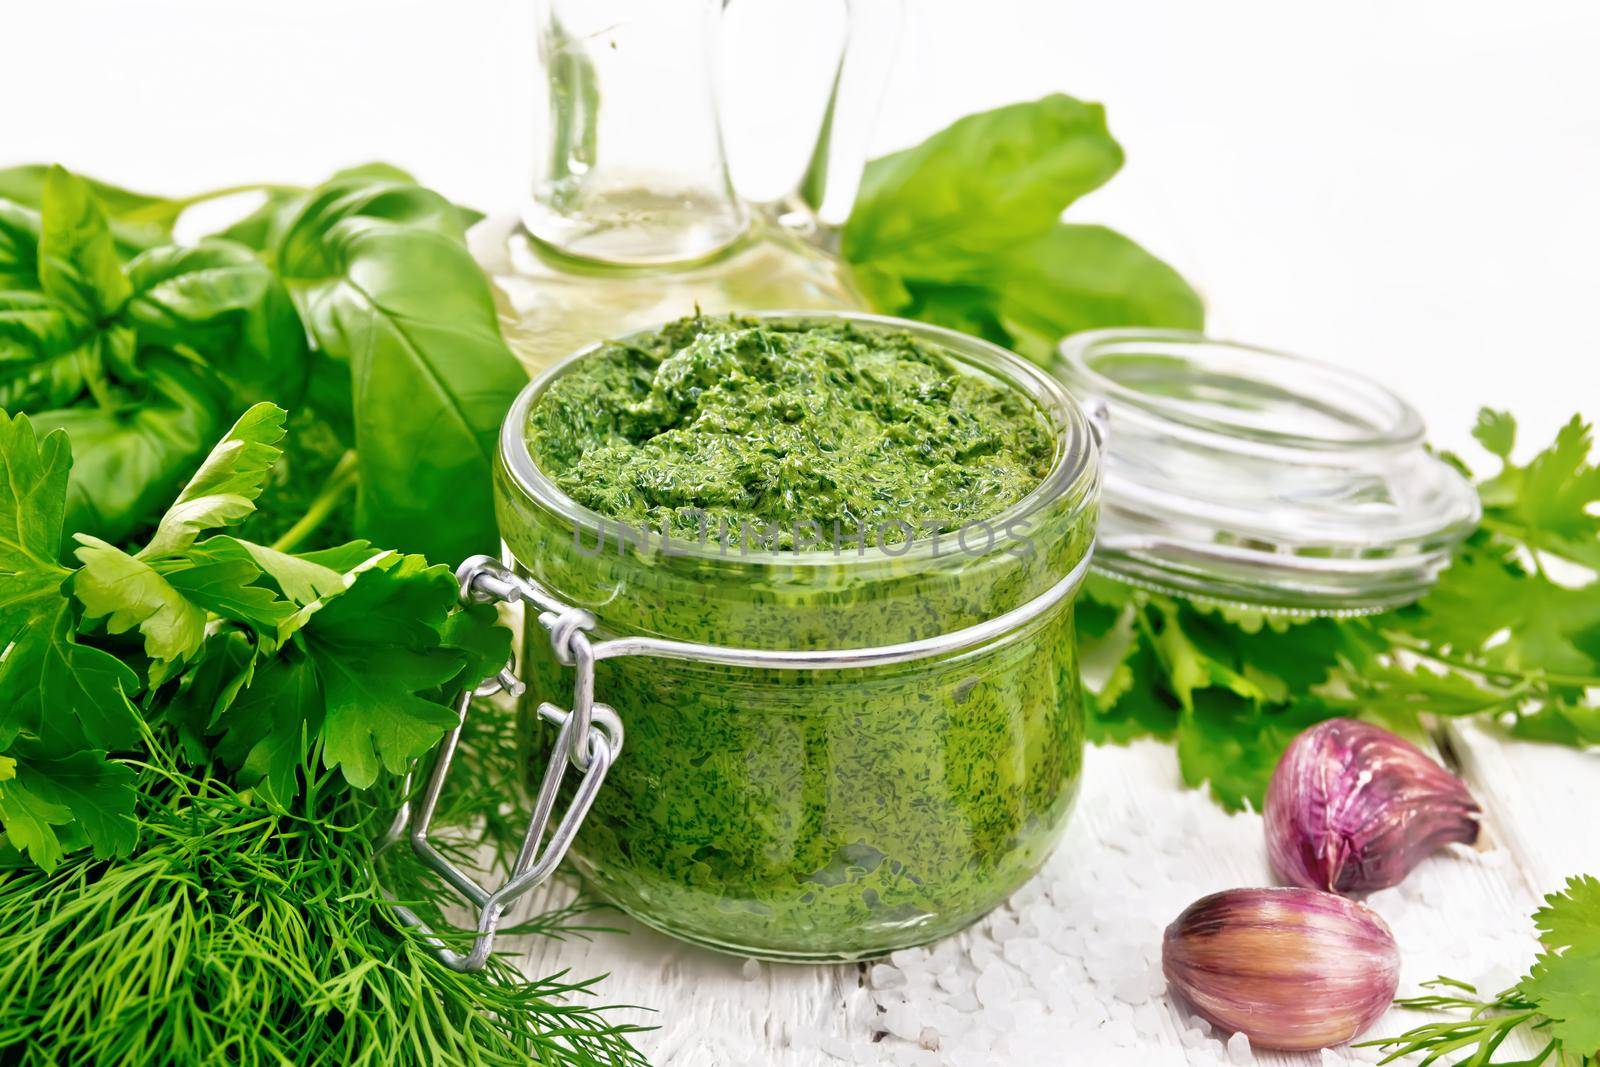 Sauce of dill, parsley, basil, cilantro, other spicy herbs, garlic and vegetable oil in a glass jar, coarse salt on wooden board background